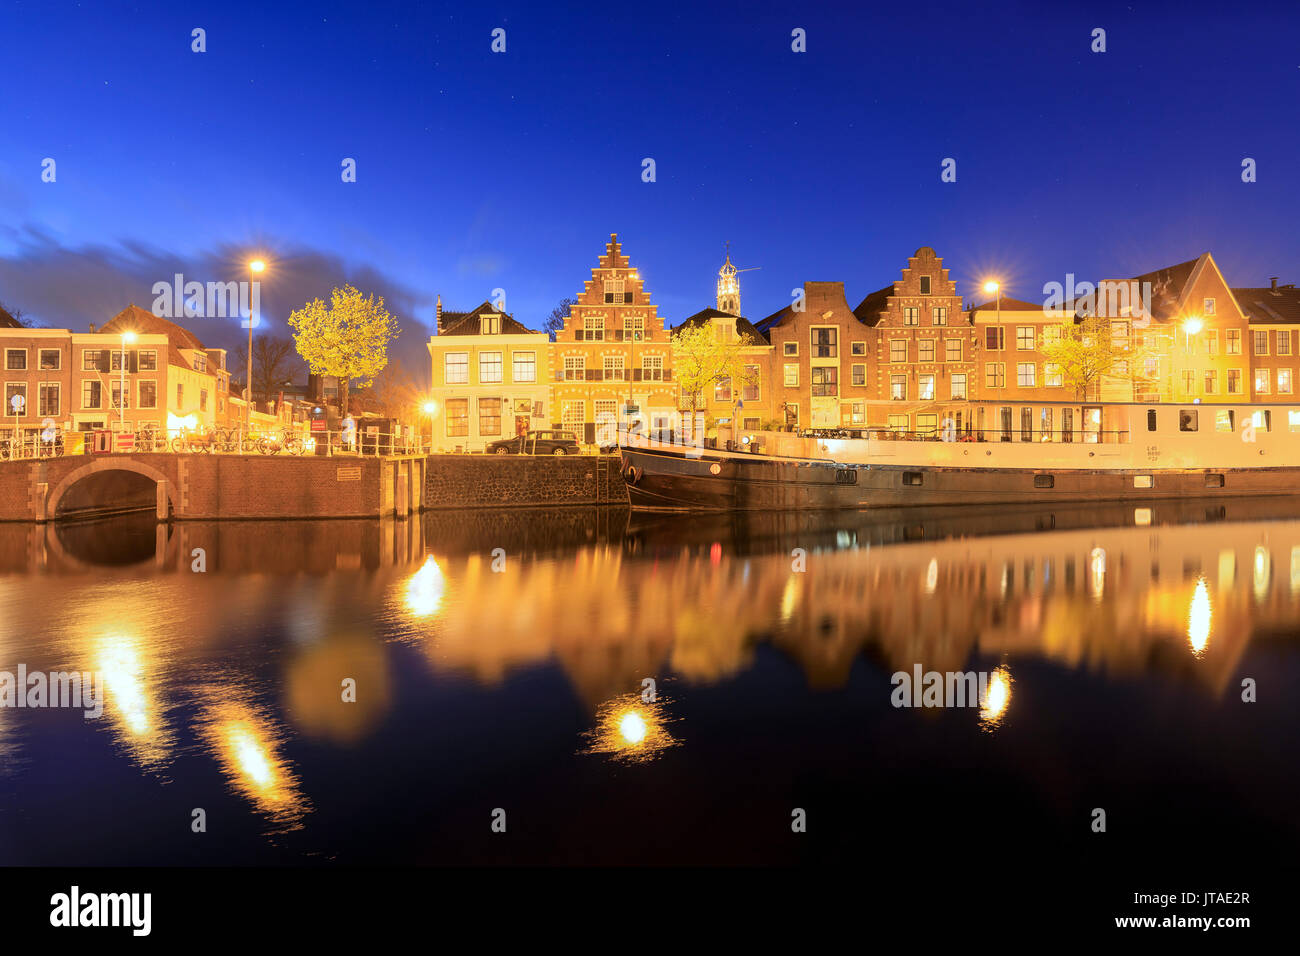 Dusk lights on typical houses and bridge reflected in a canal of the River Spaarne, Haarlem, North Holland, The Netherlands Stock Photo